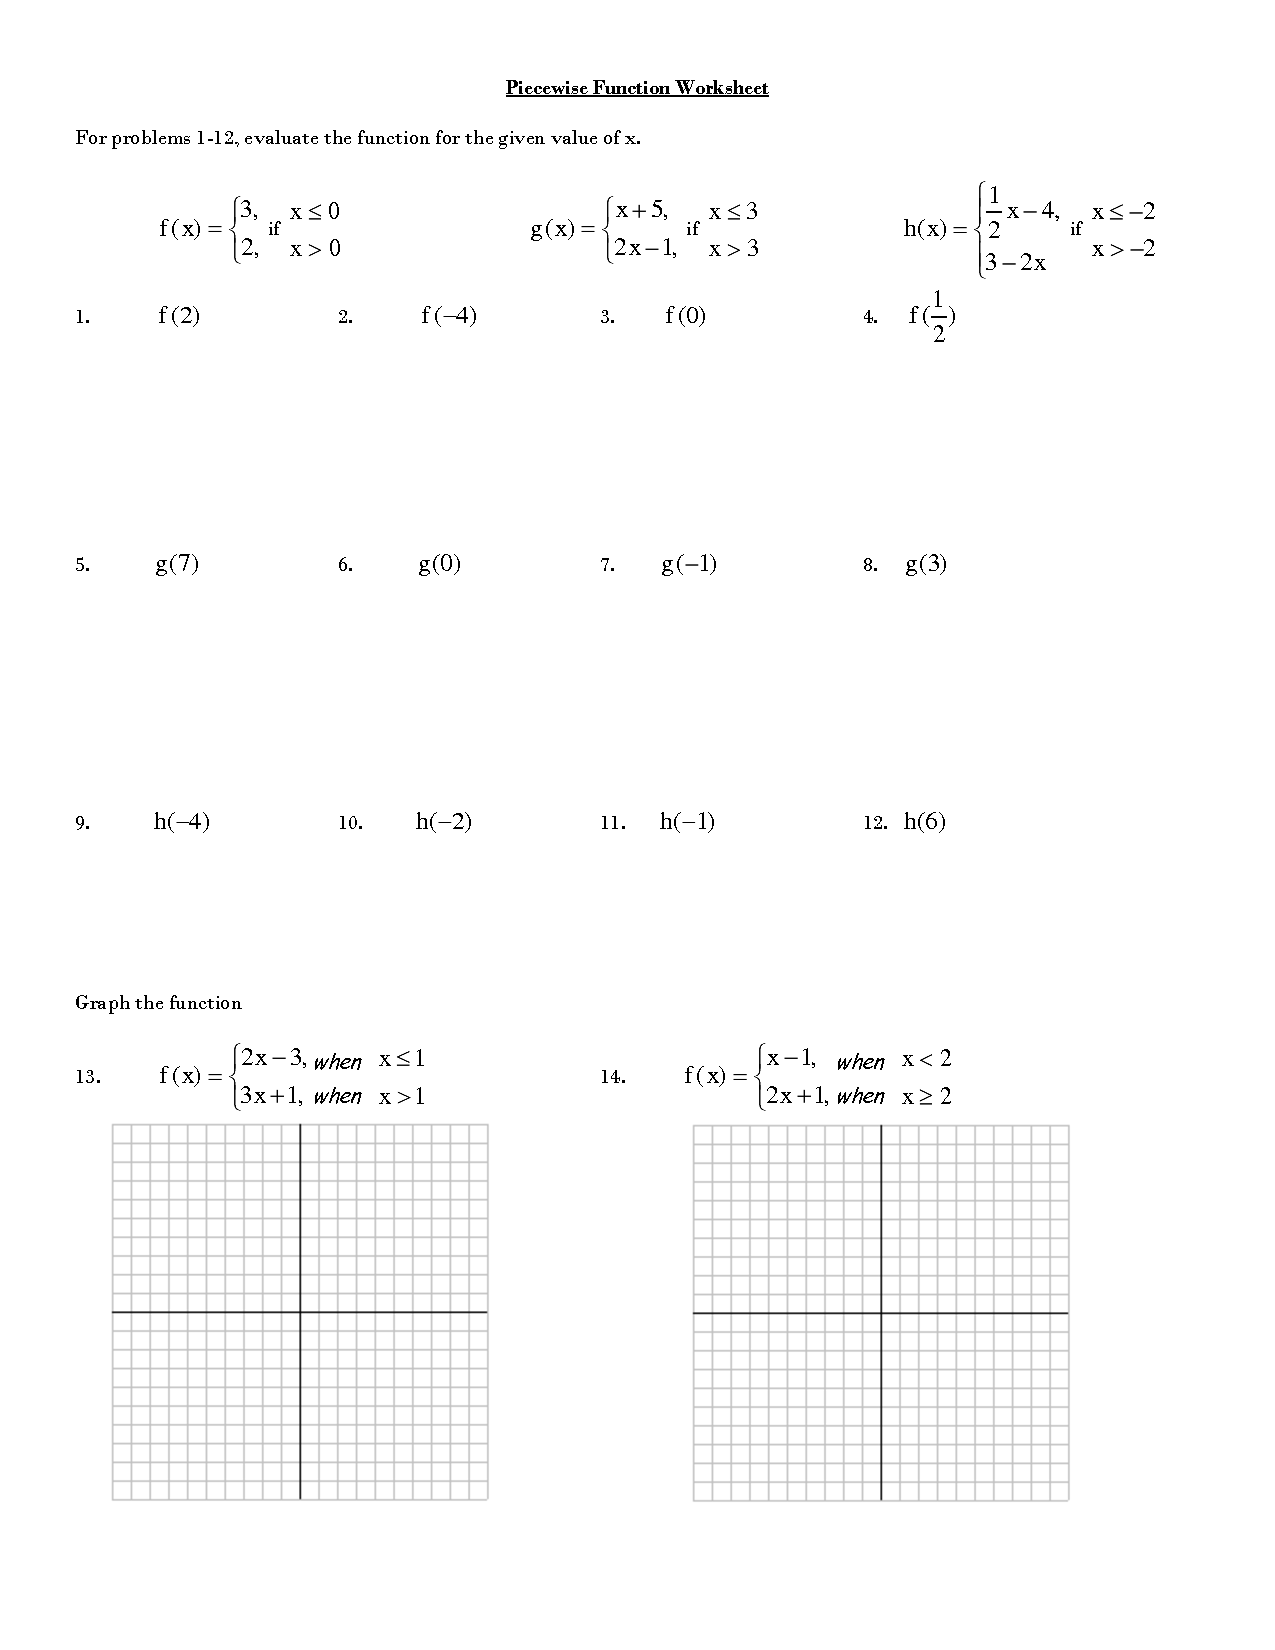 graphing-and-evaluating-piecewise-functions-worksheet-mobinspire